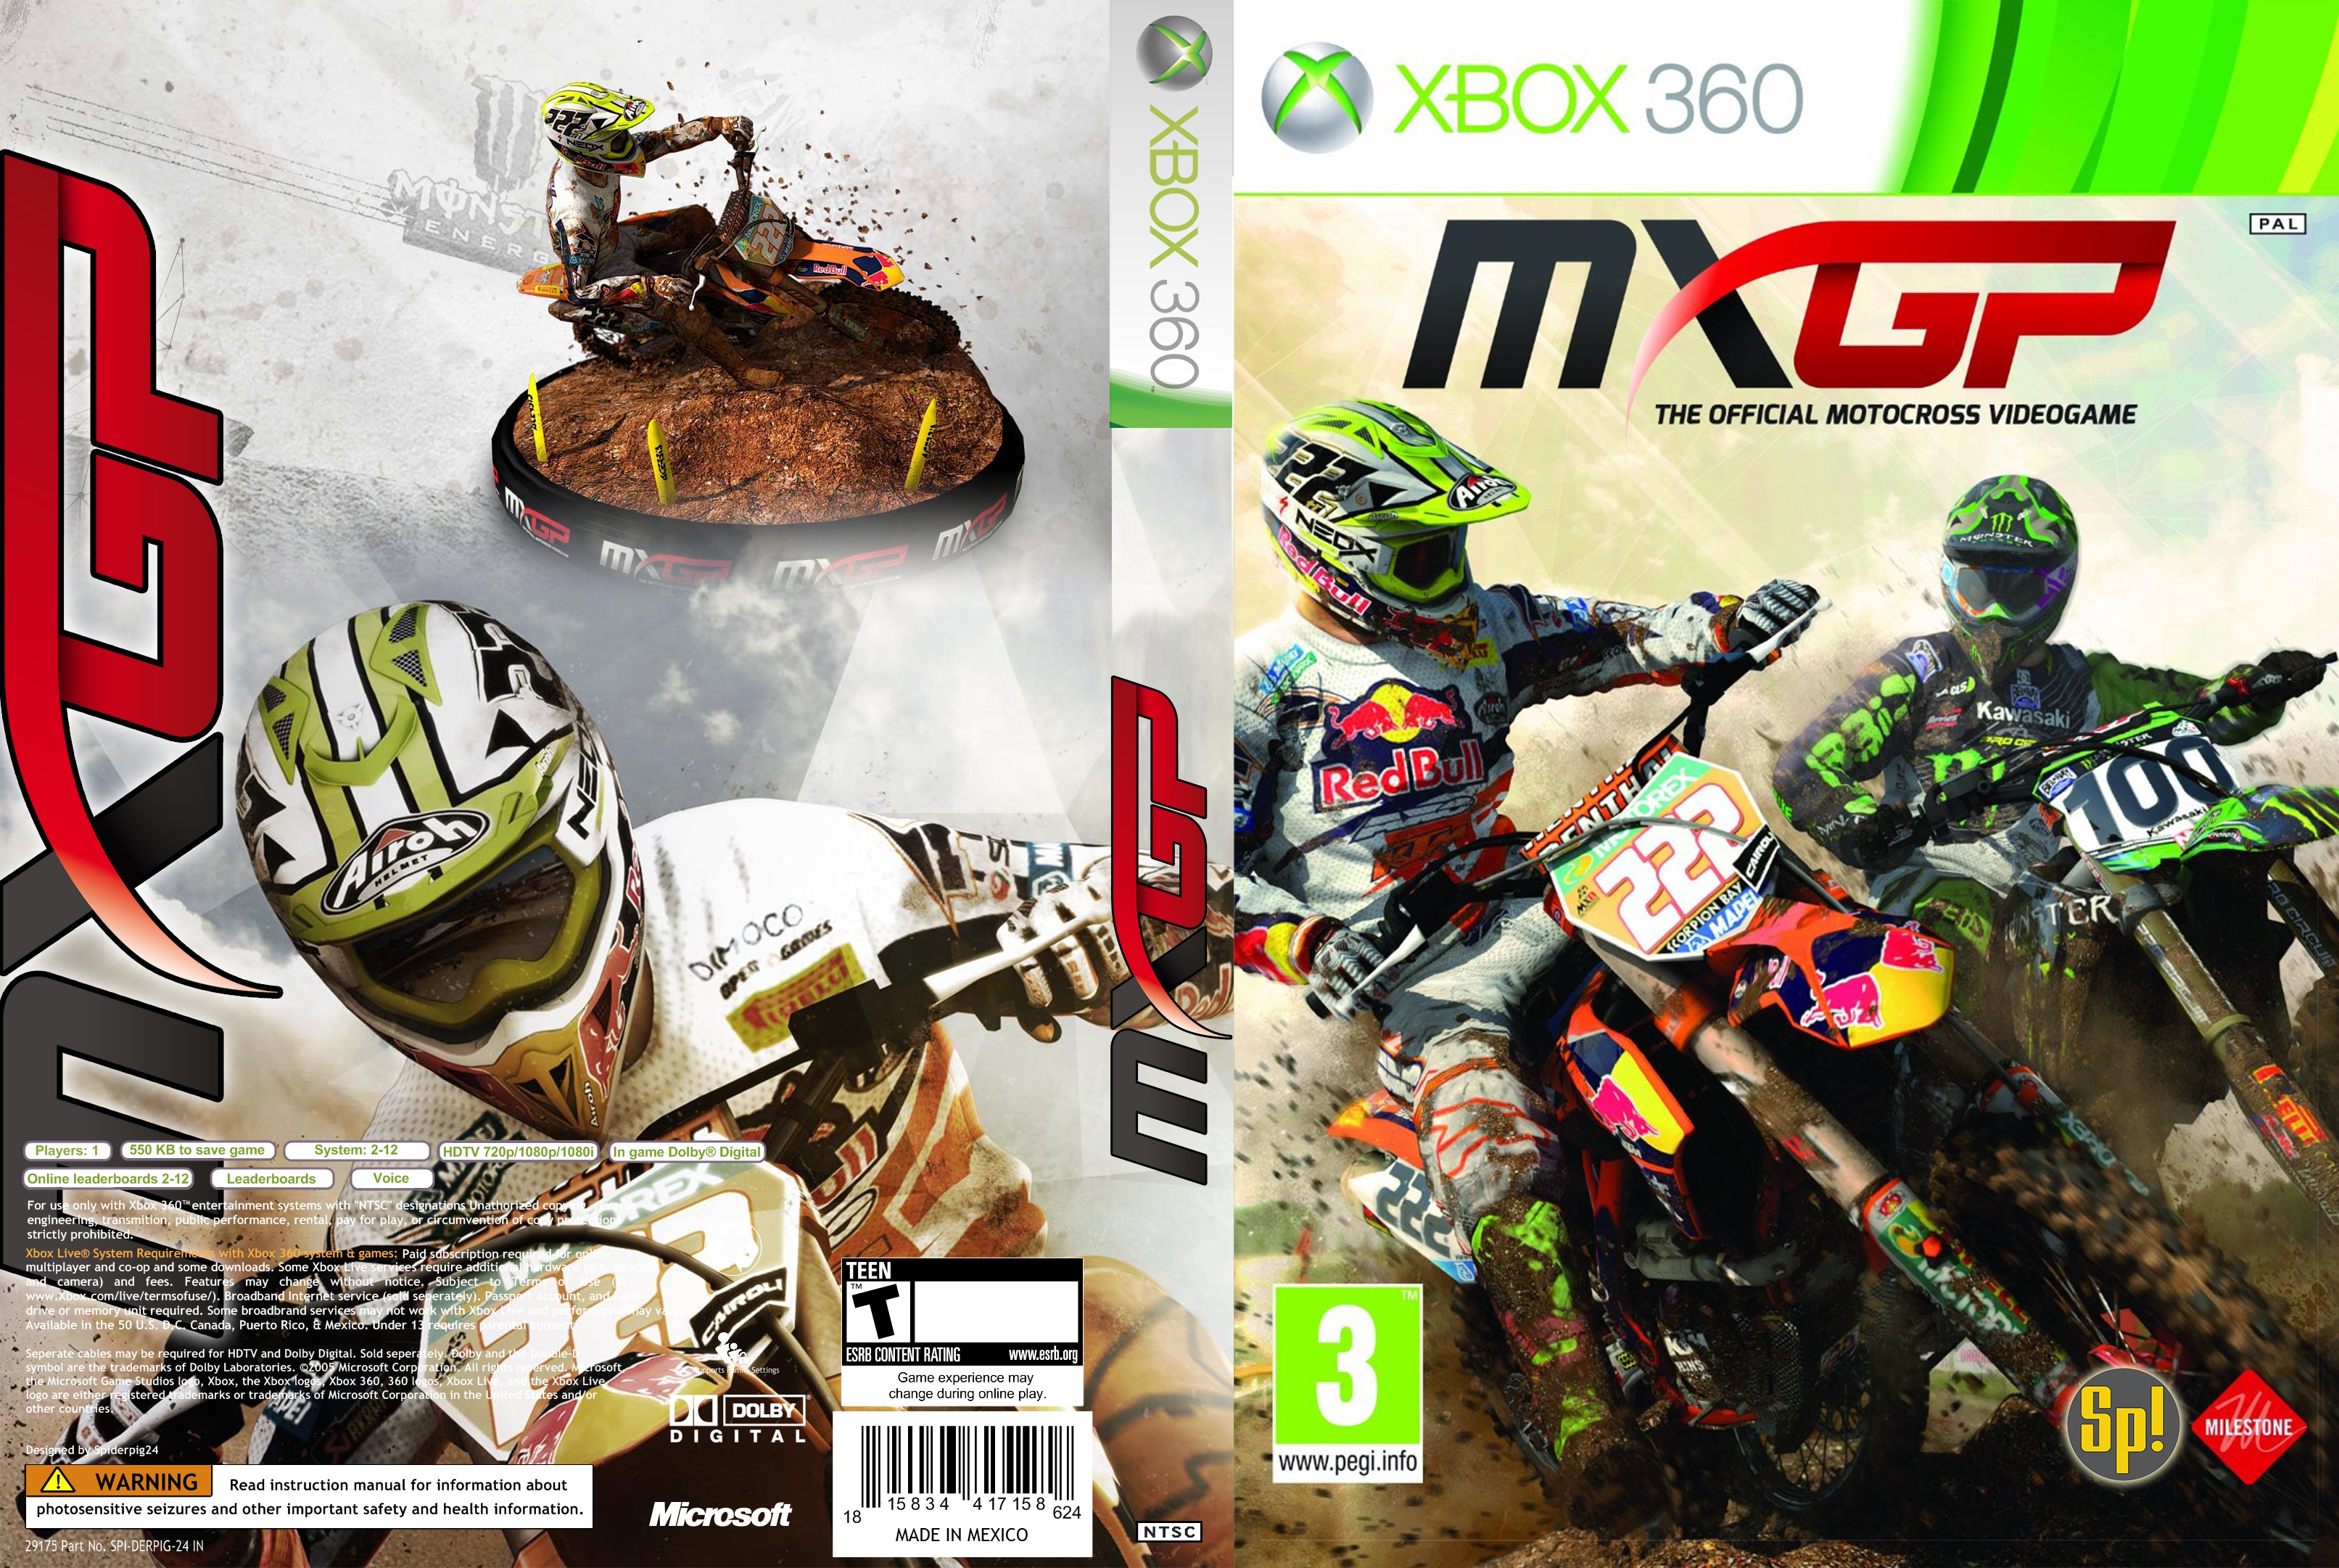 MXGP - The Official Motocross Videogame box cover